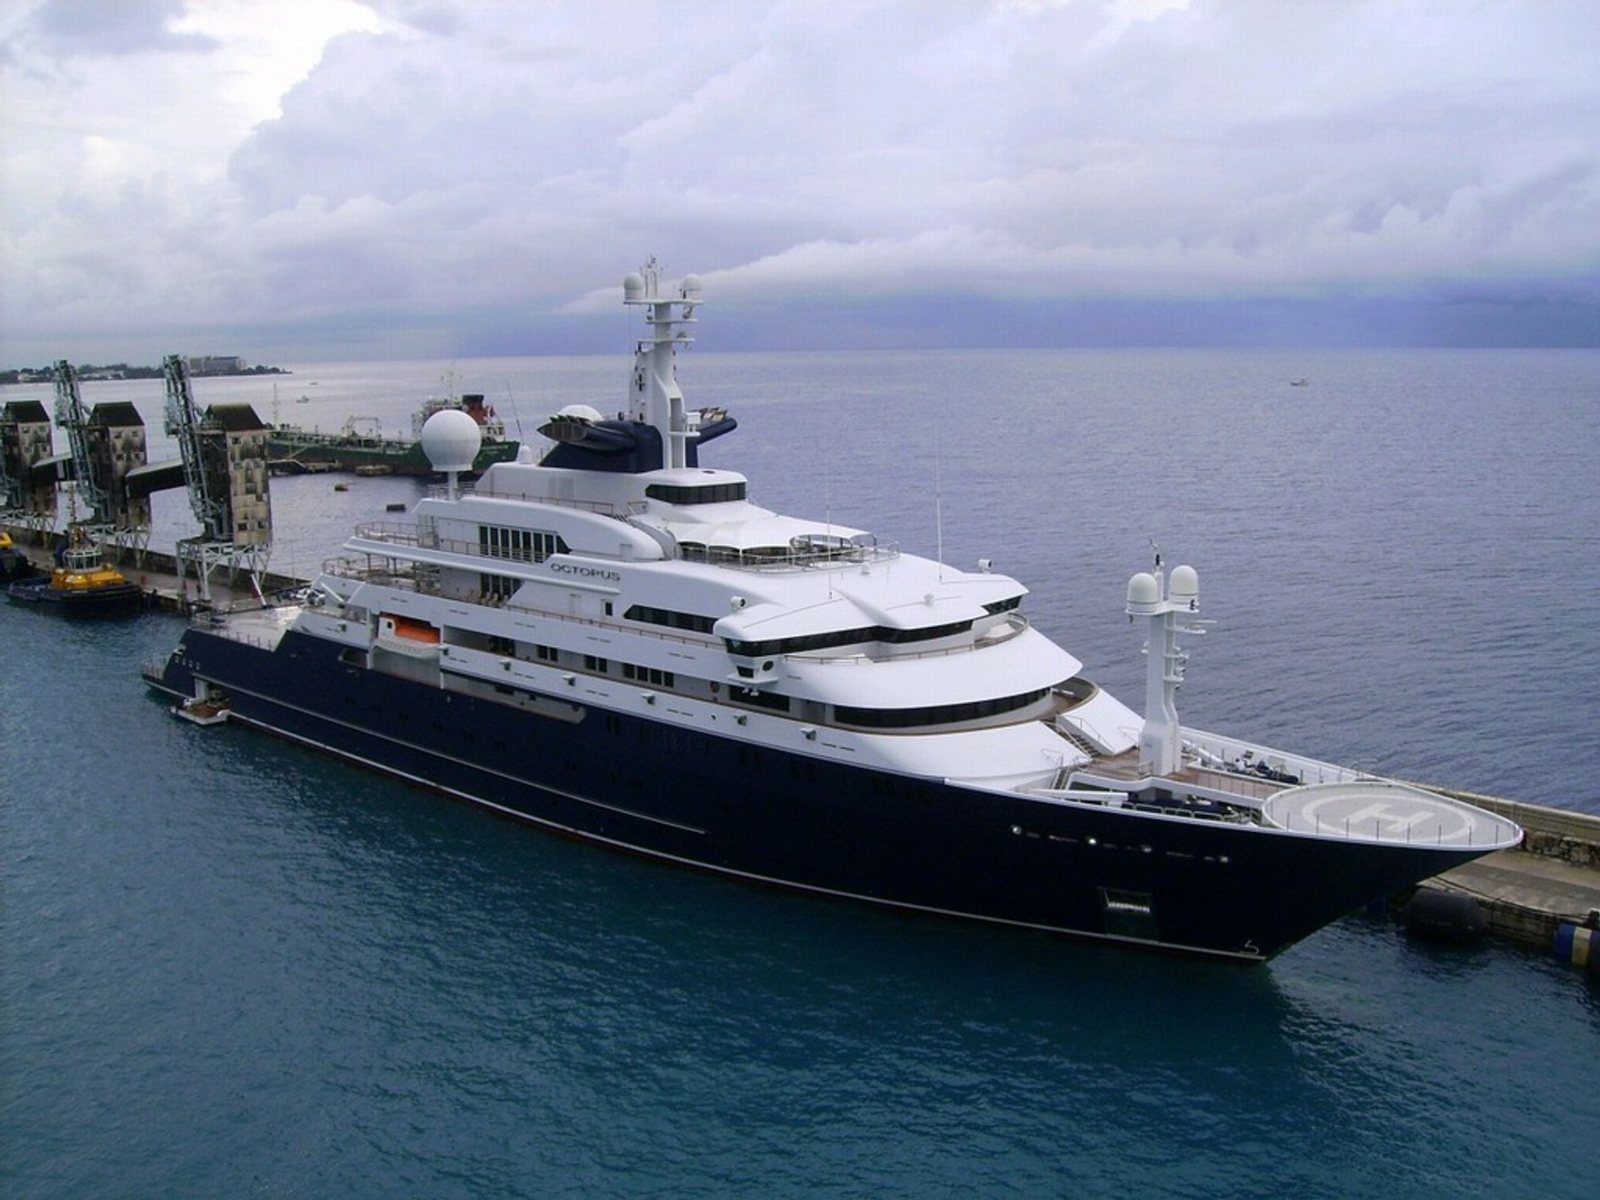 who owns the super yacht octopus